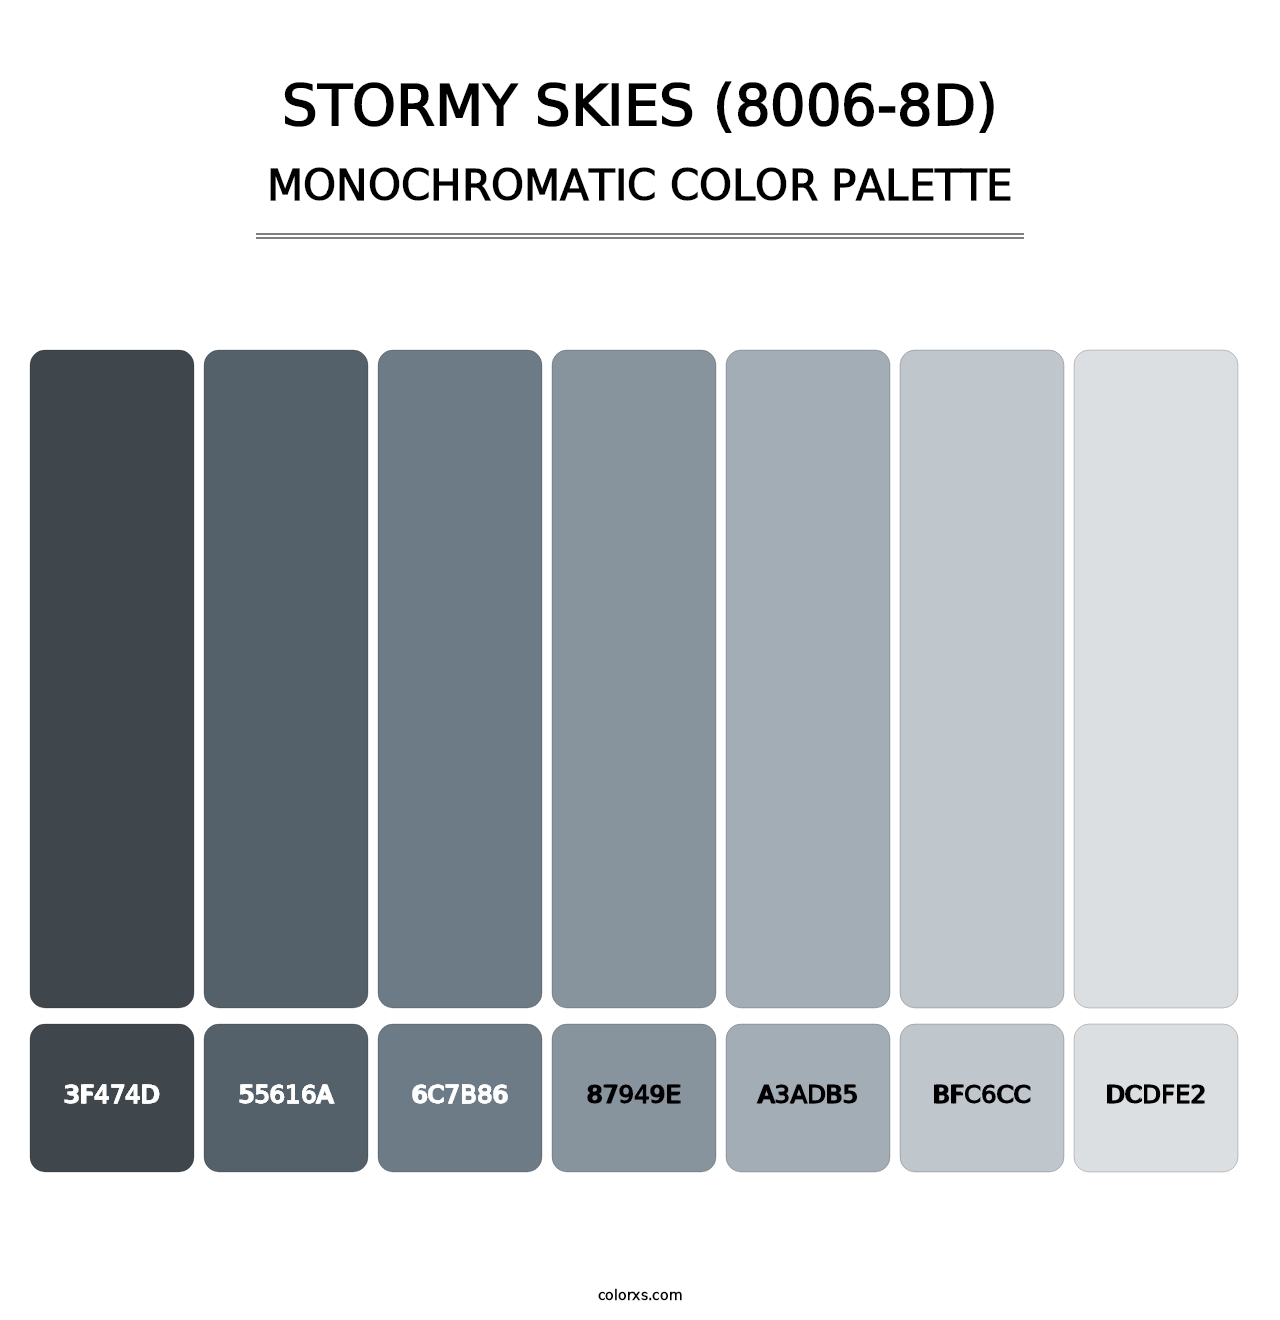 Stormy Skies (8006-8D) - Monochromatic Color Palette